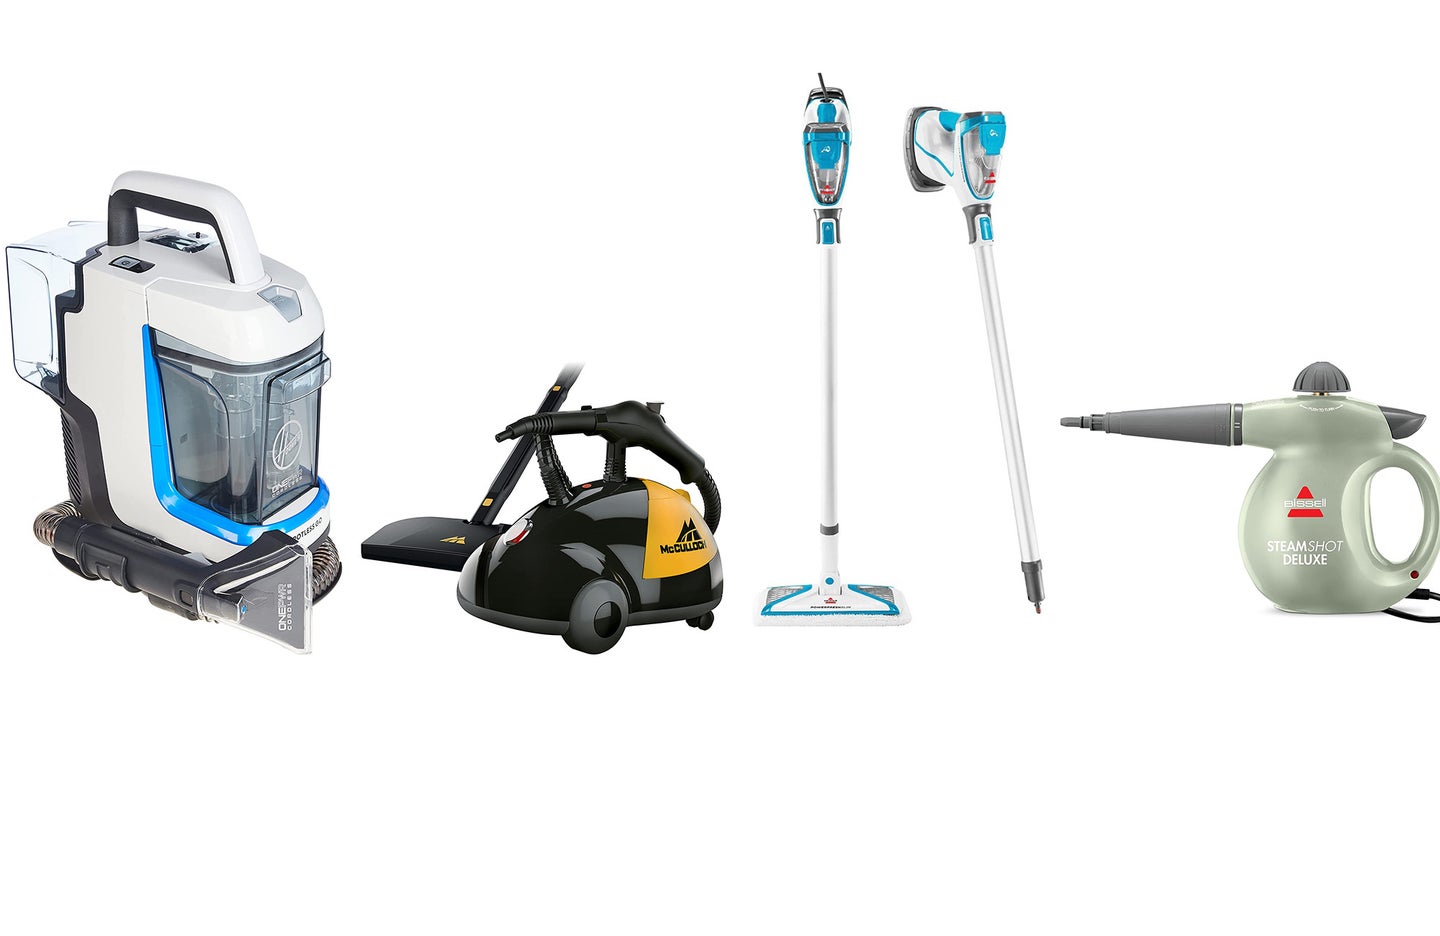 The best steam cleaners power wash your home-- without the dangerous chemicals.